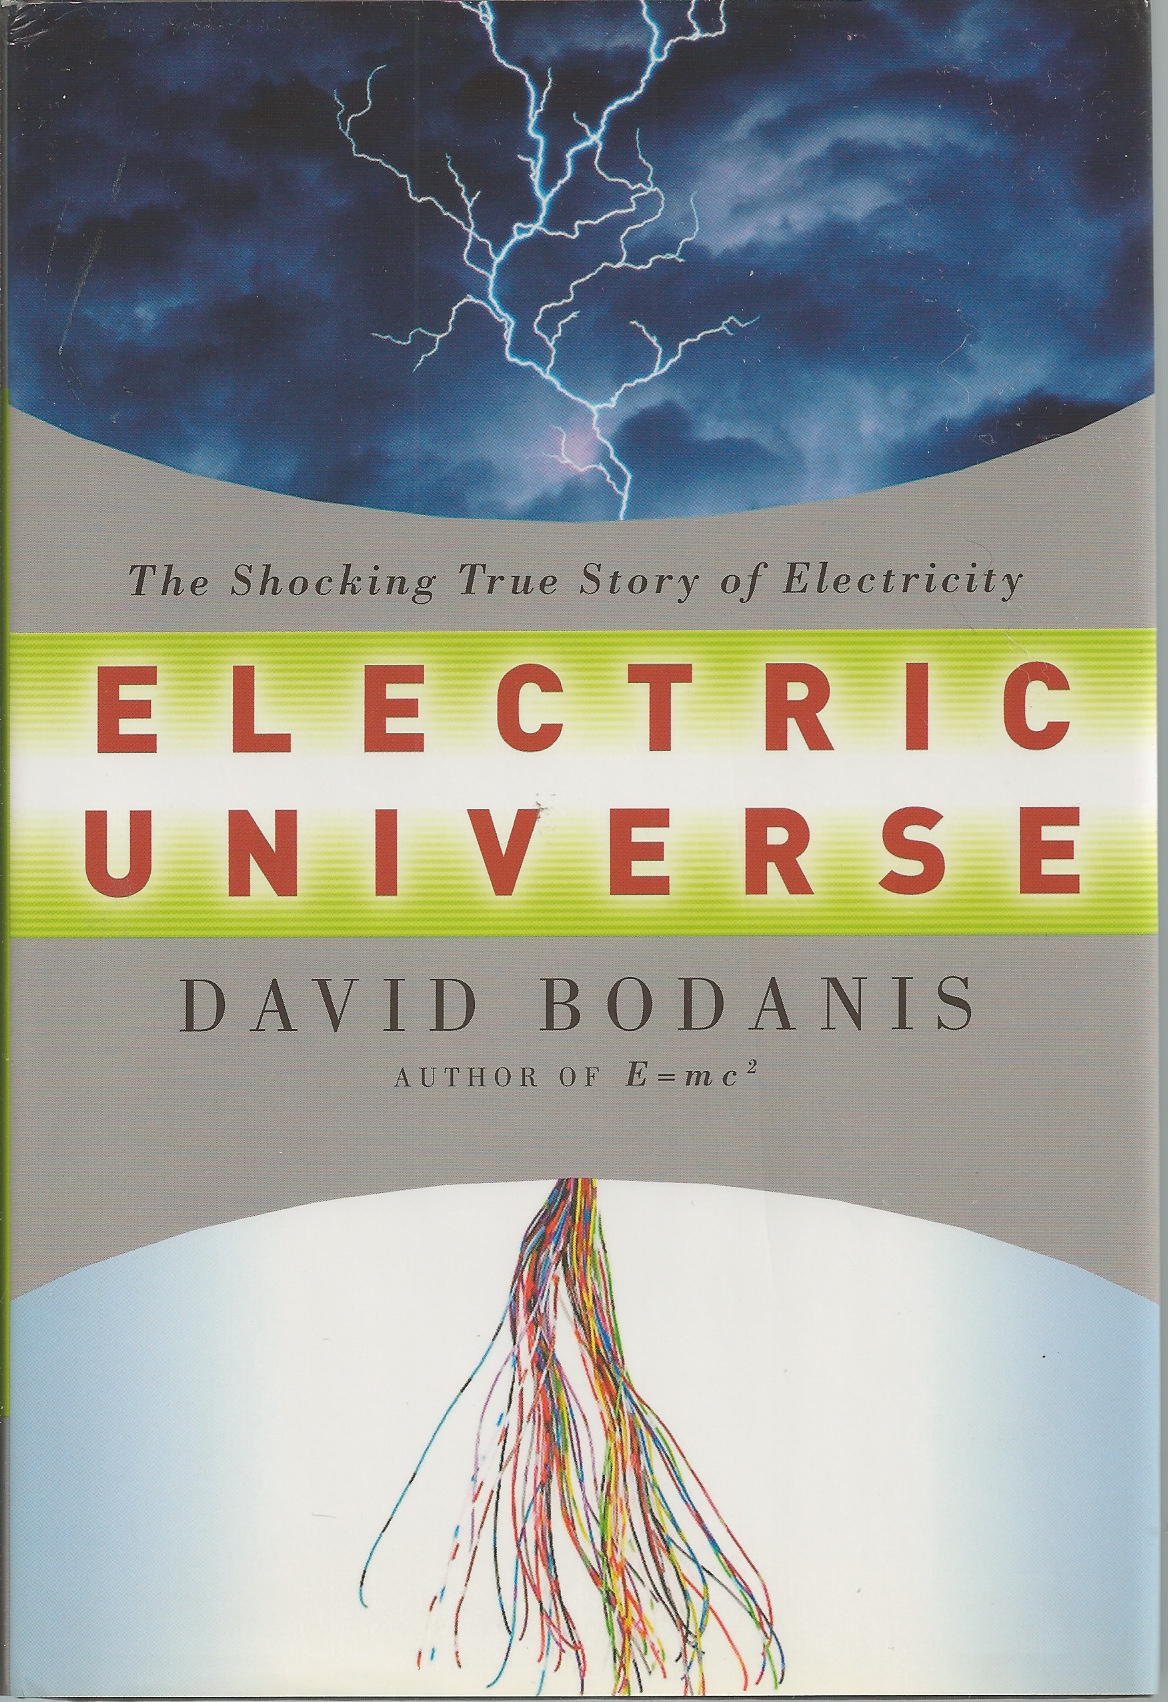 BODANIS, DAVID - Electric Universe the Shocking True Story of Electricity